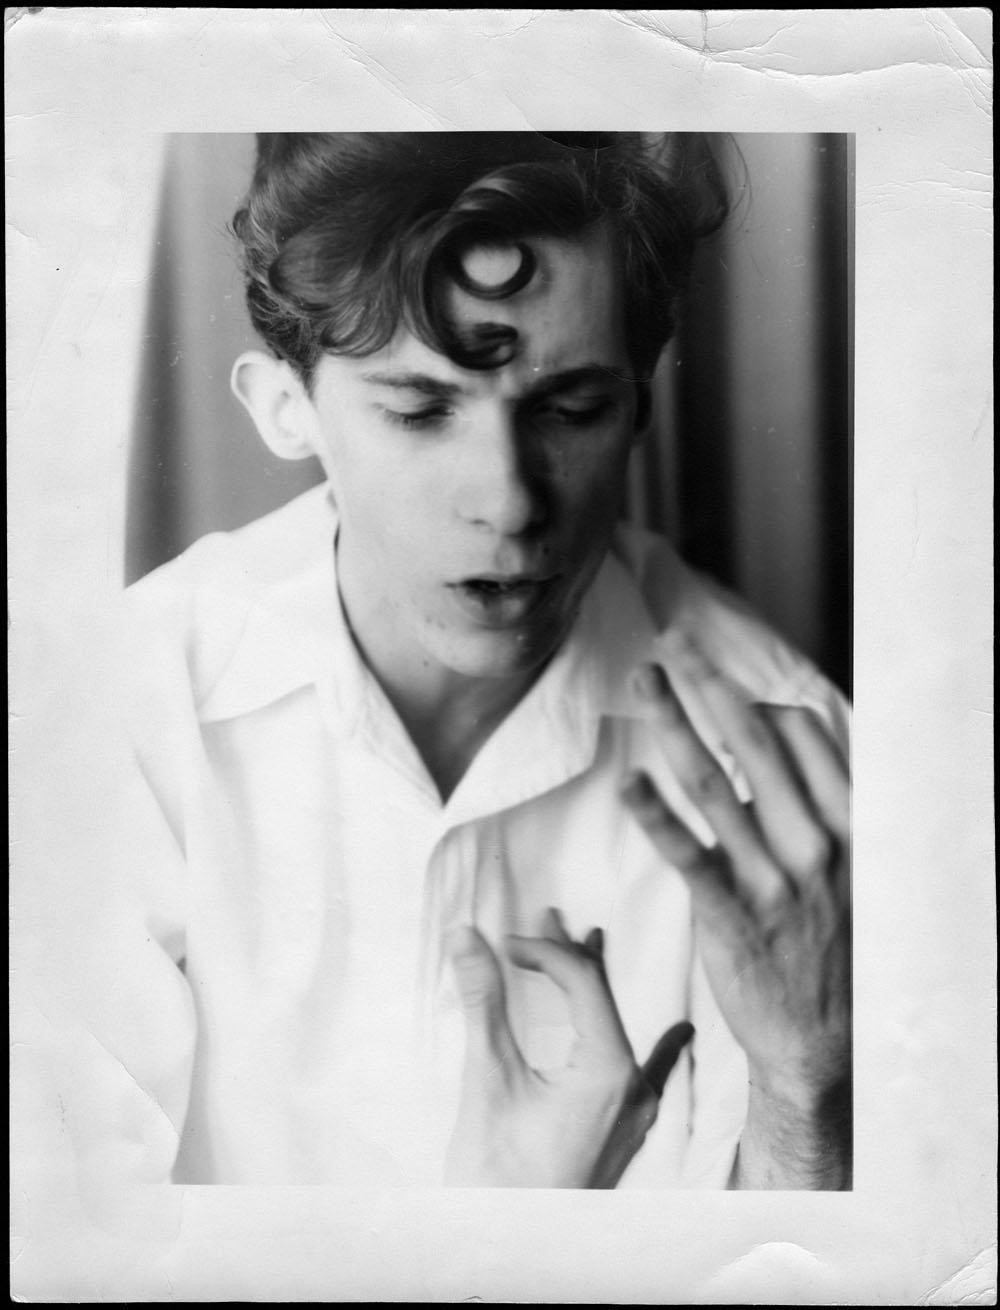 Portrait of a young Glenn Gould dressed in a white shirt. Gould is looking slightly down while speaking. He holds his hands in a gesture in front of his body.